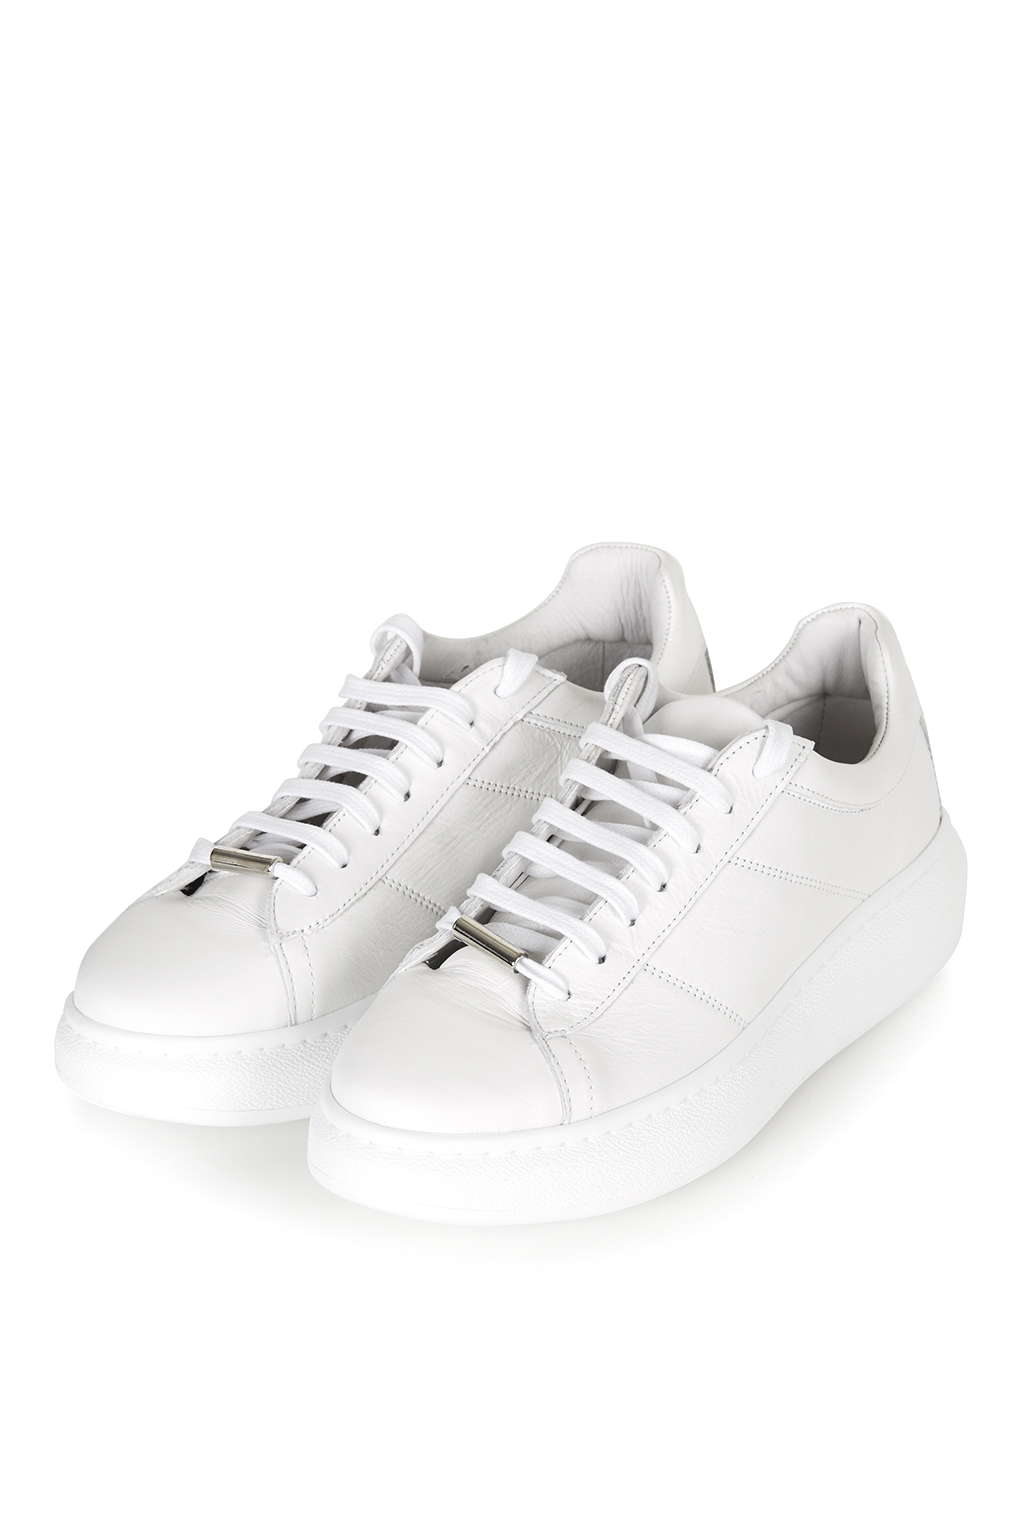 topshop white trainers